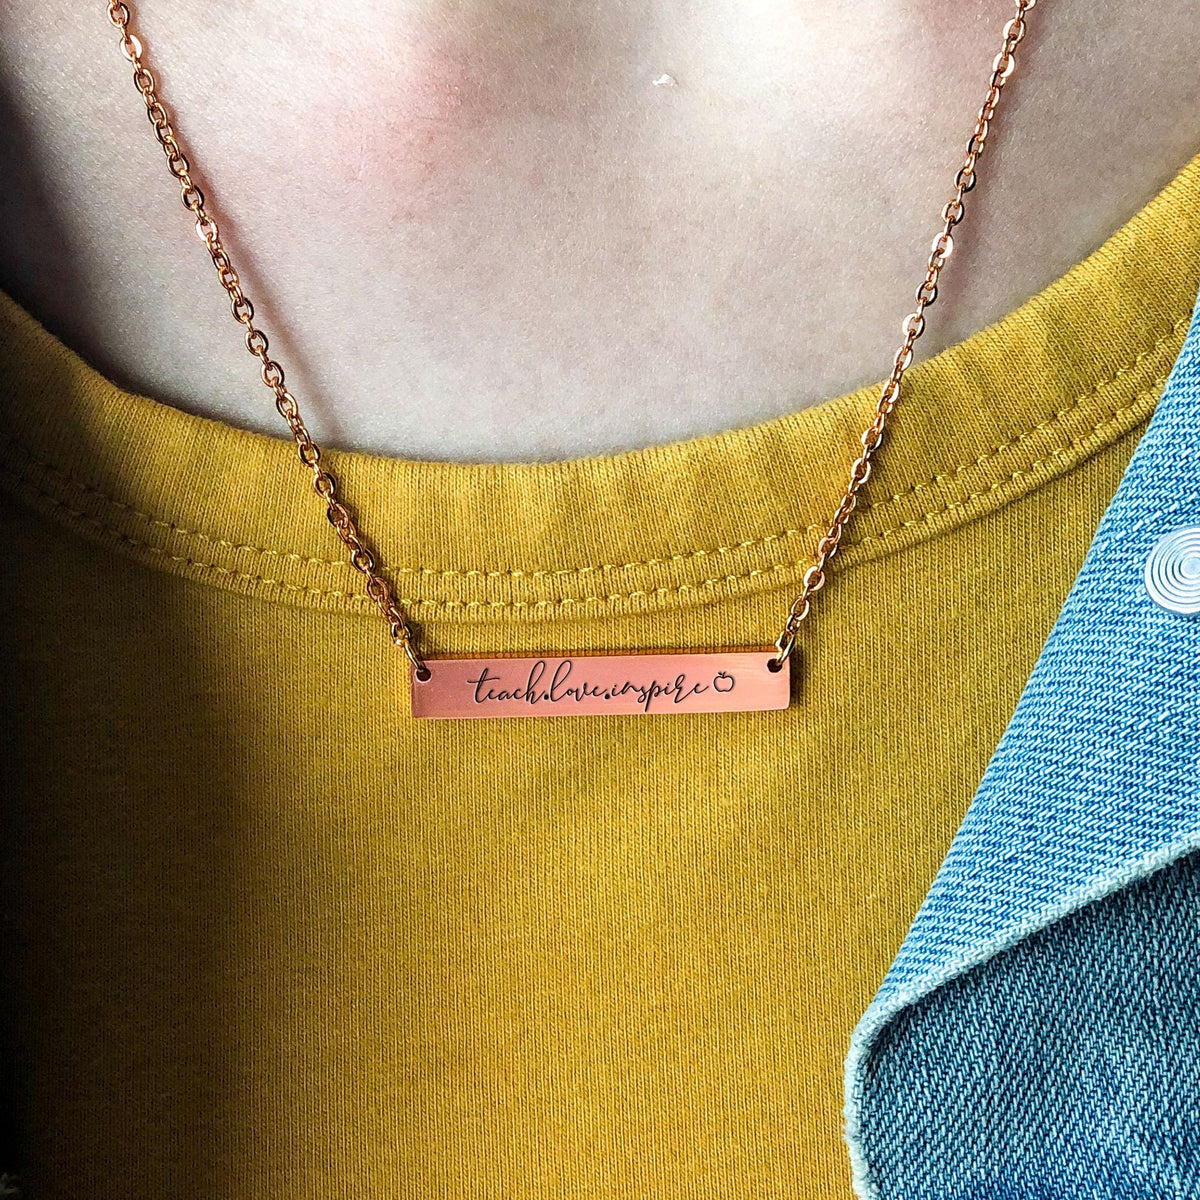 Teach Love Inspire - Engraved Necklace